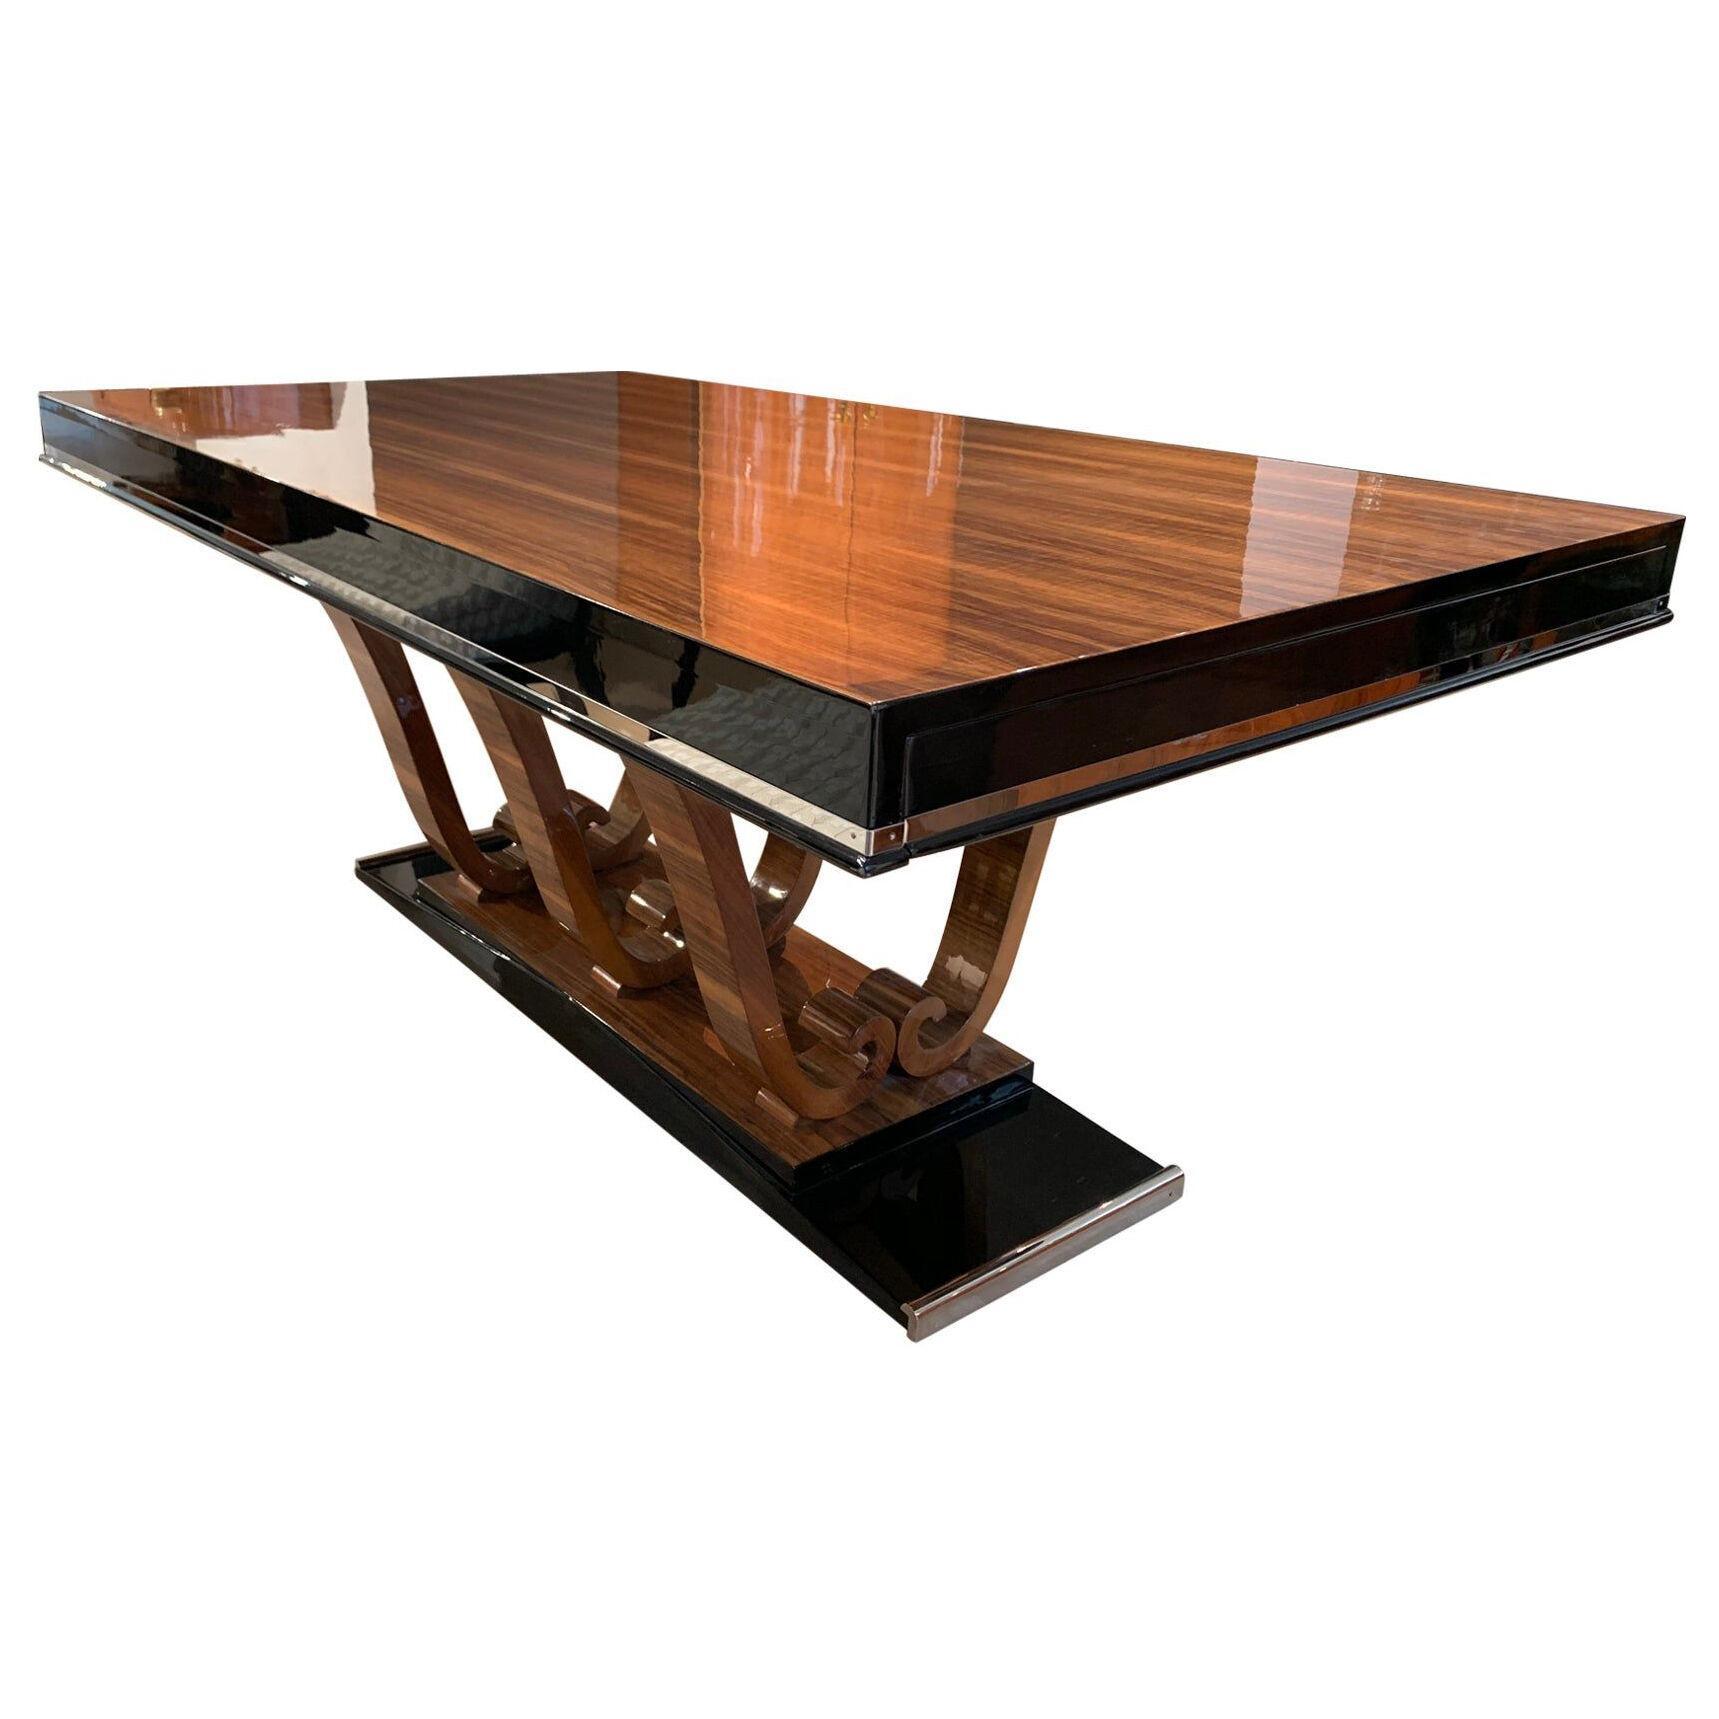 Expandable Art Deco Dining Table, Walnut and Black Lacquer, France, circa 1930